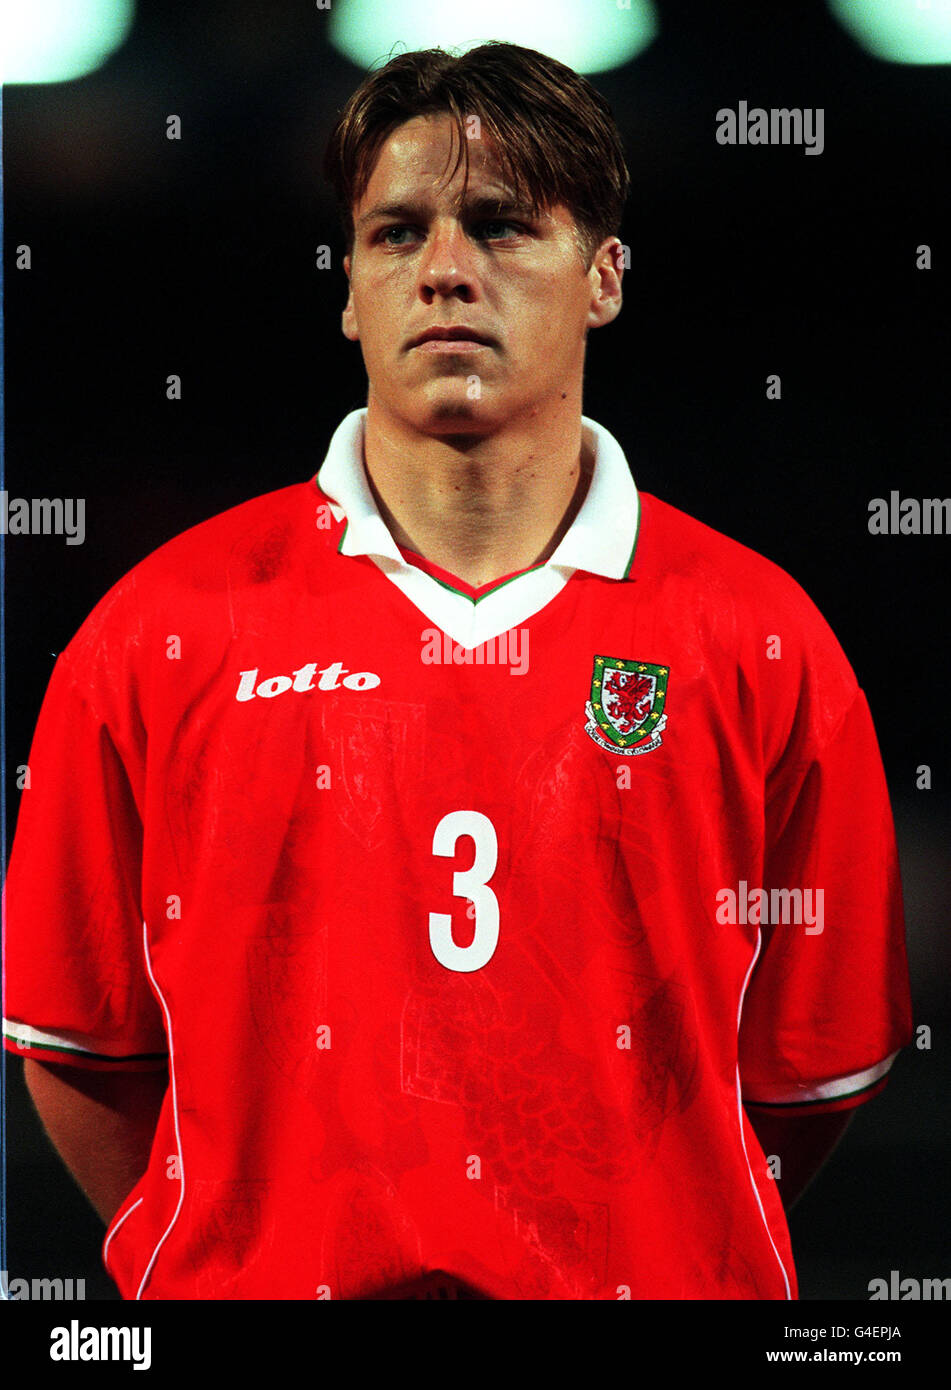 DARREN BARNARD (WHO PLAYS FOR BARNSLEY FC) LINES UP WITH THE WELSH NATIONAL FOOTBALL TEAM PRIOR TO THEIR EUROPEAN CHAMPIONSHIP QUALIFYING MATCH AGAINST BERLARUS AT NINIAN PARK, CARDIFF. Stock Photo